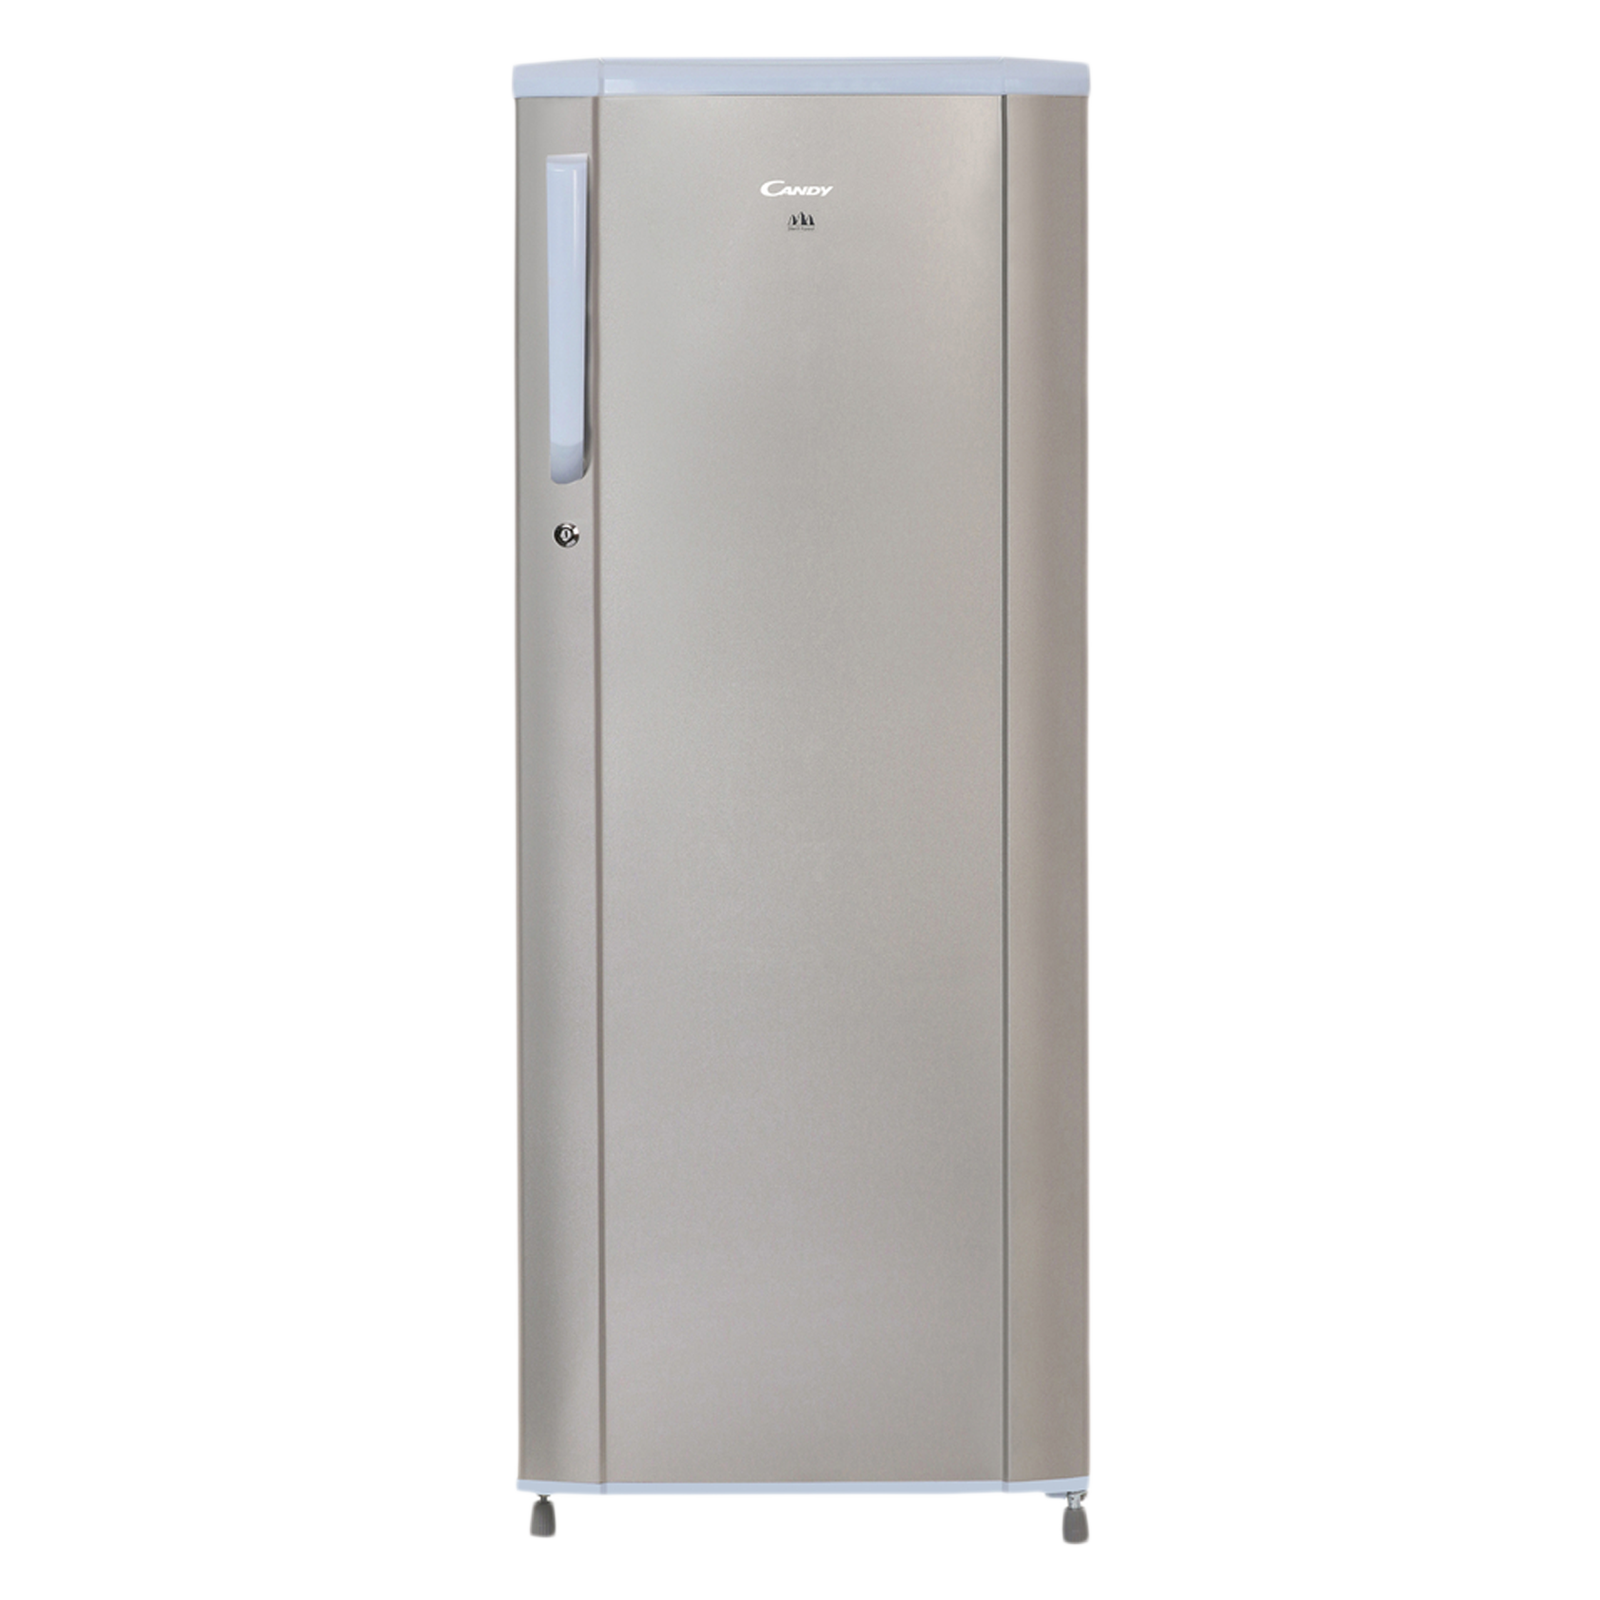 Candy 225 Liters 2 Star Direct Cool Single Door Refrigerator with Turbo Icing Technology (CSD2252MS, Moon Silver)_1